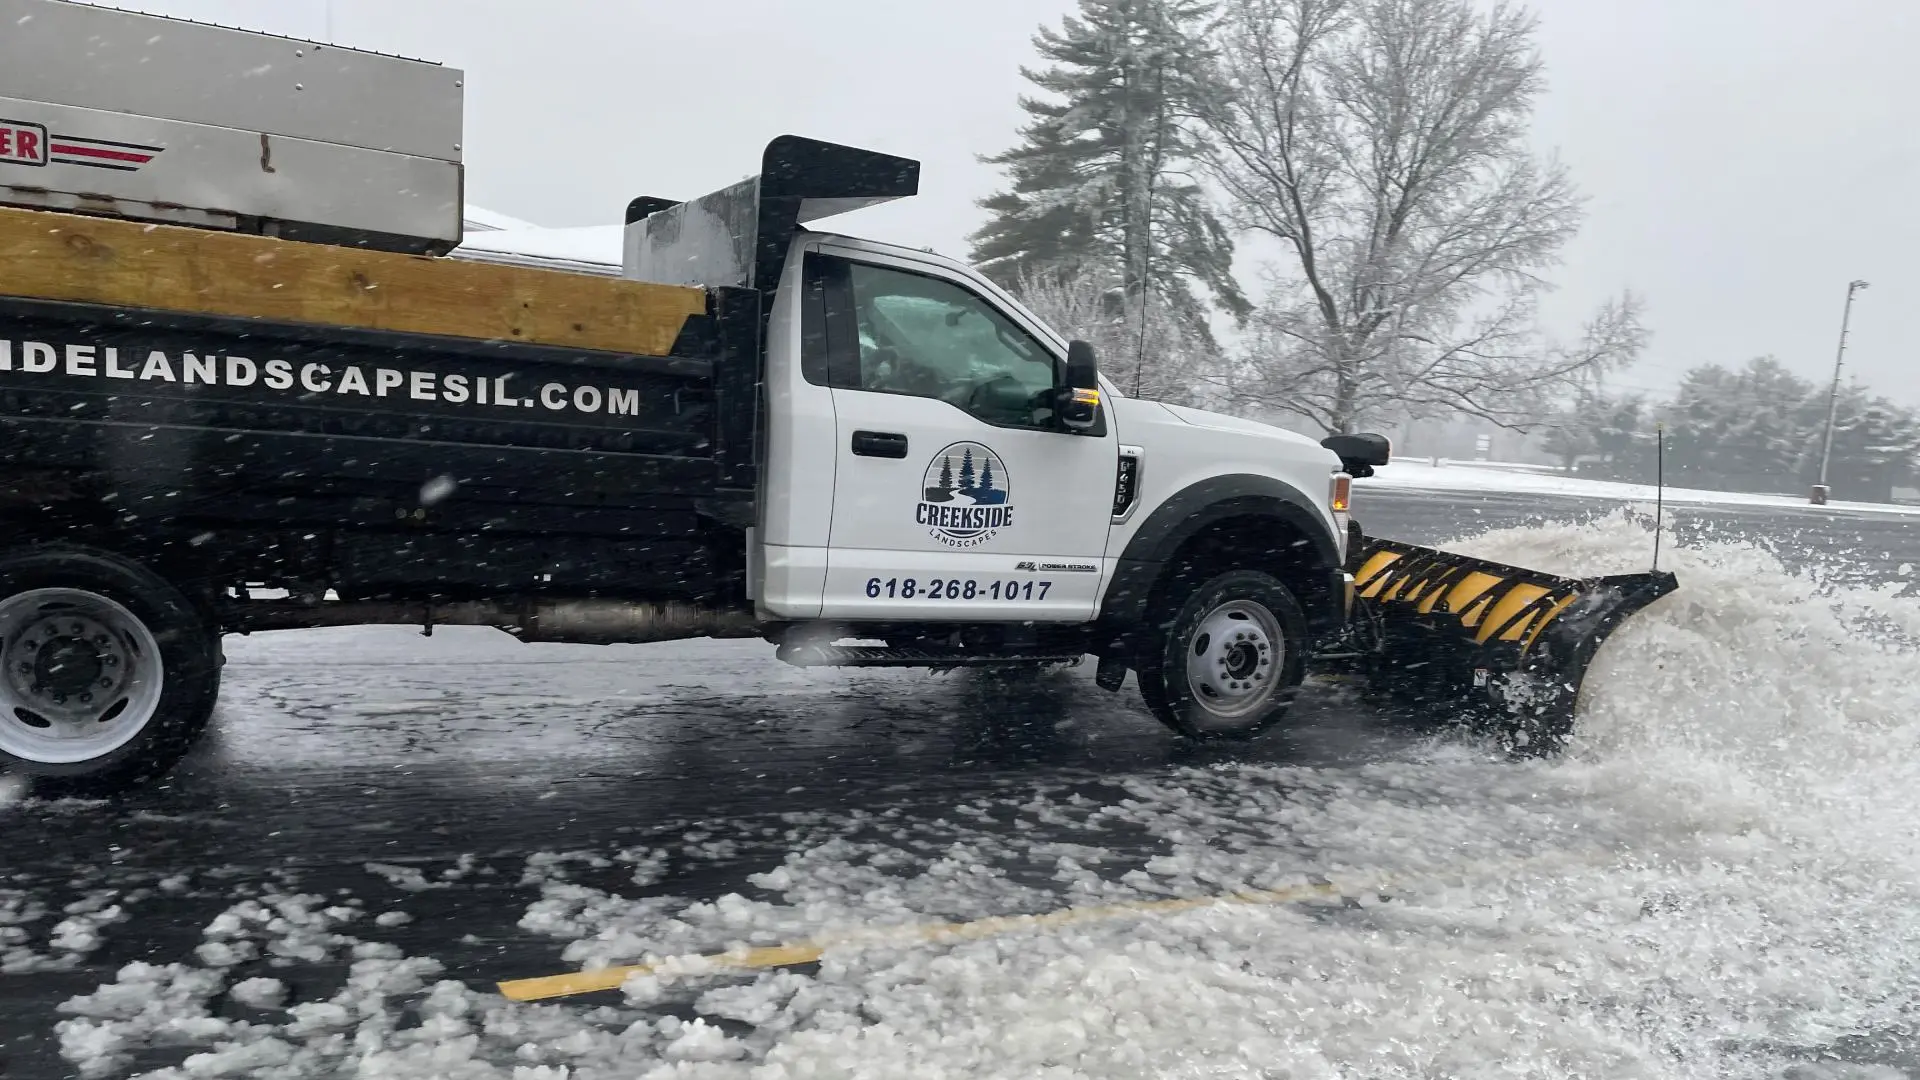 Creekside plowing truck in commercial lot during snowfall in Edwardsville, IL.